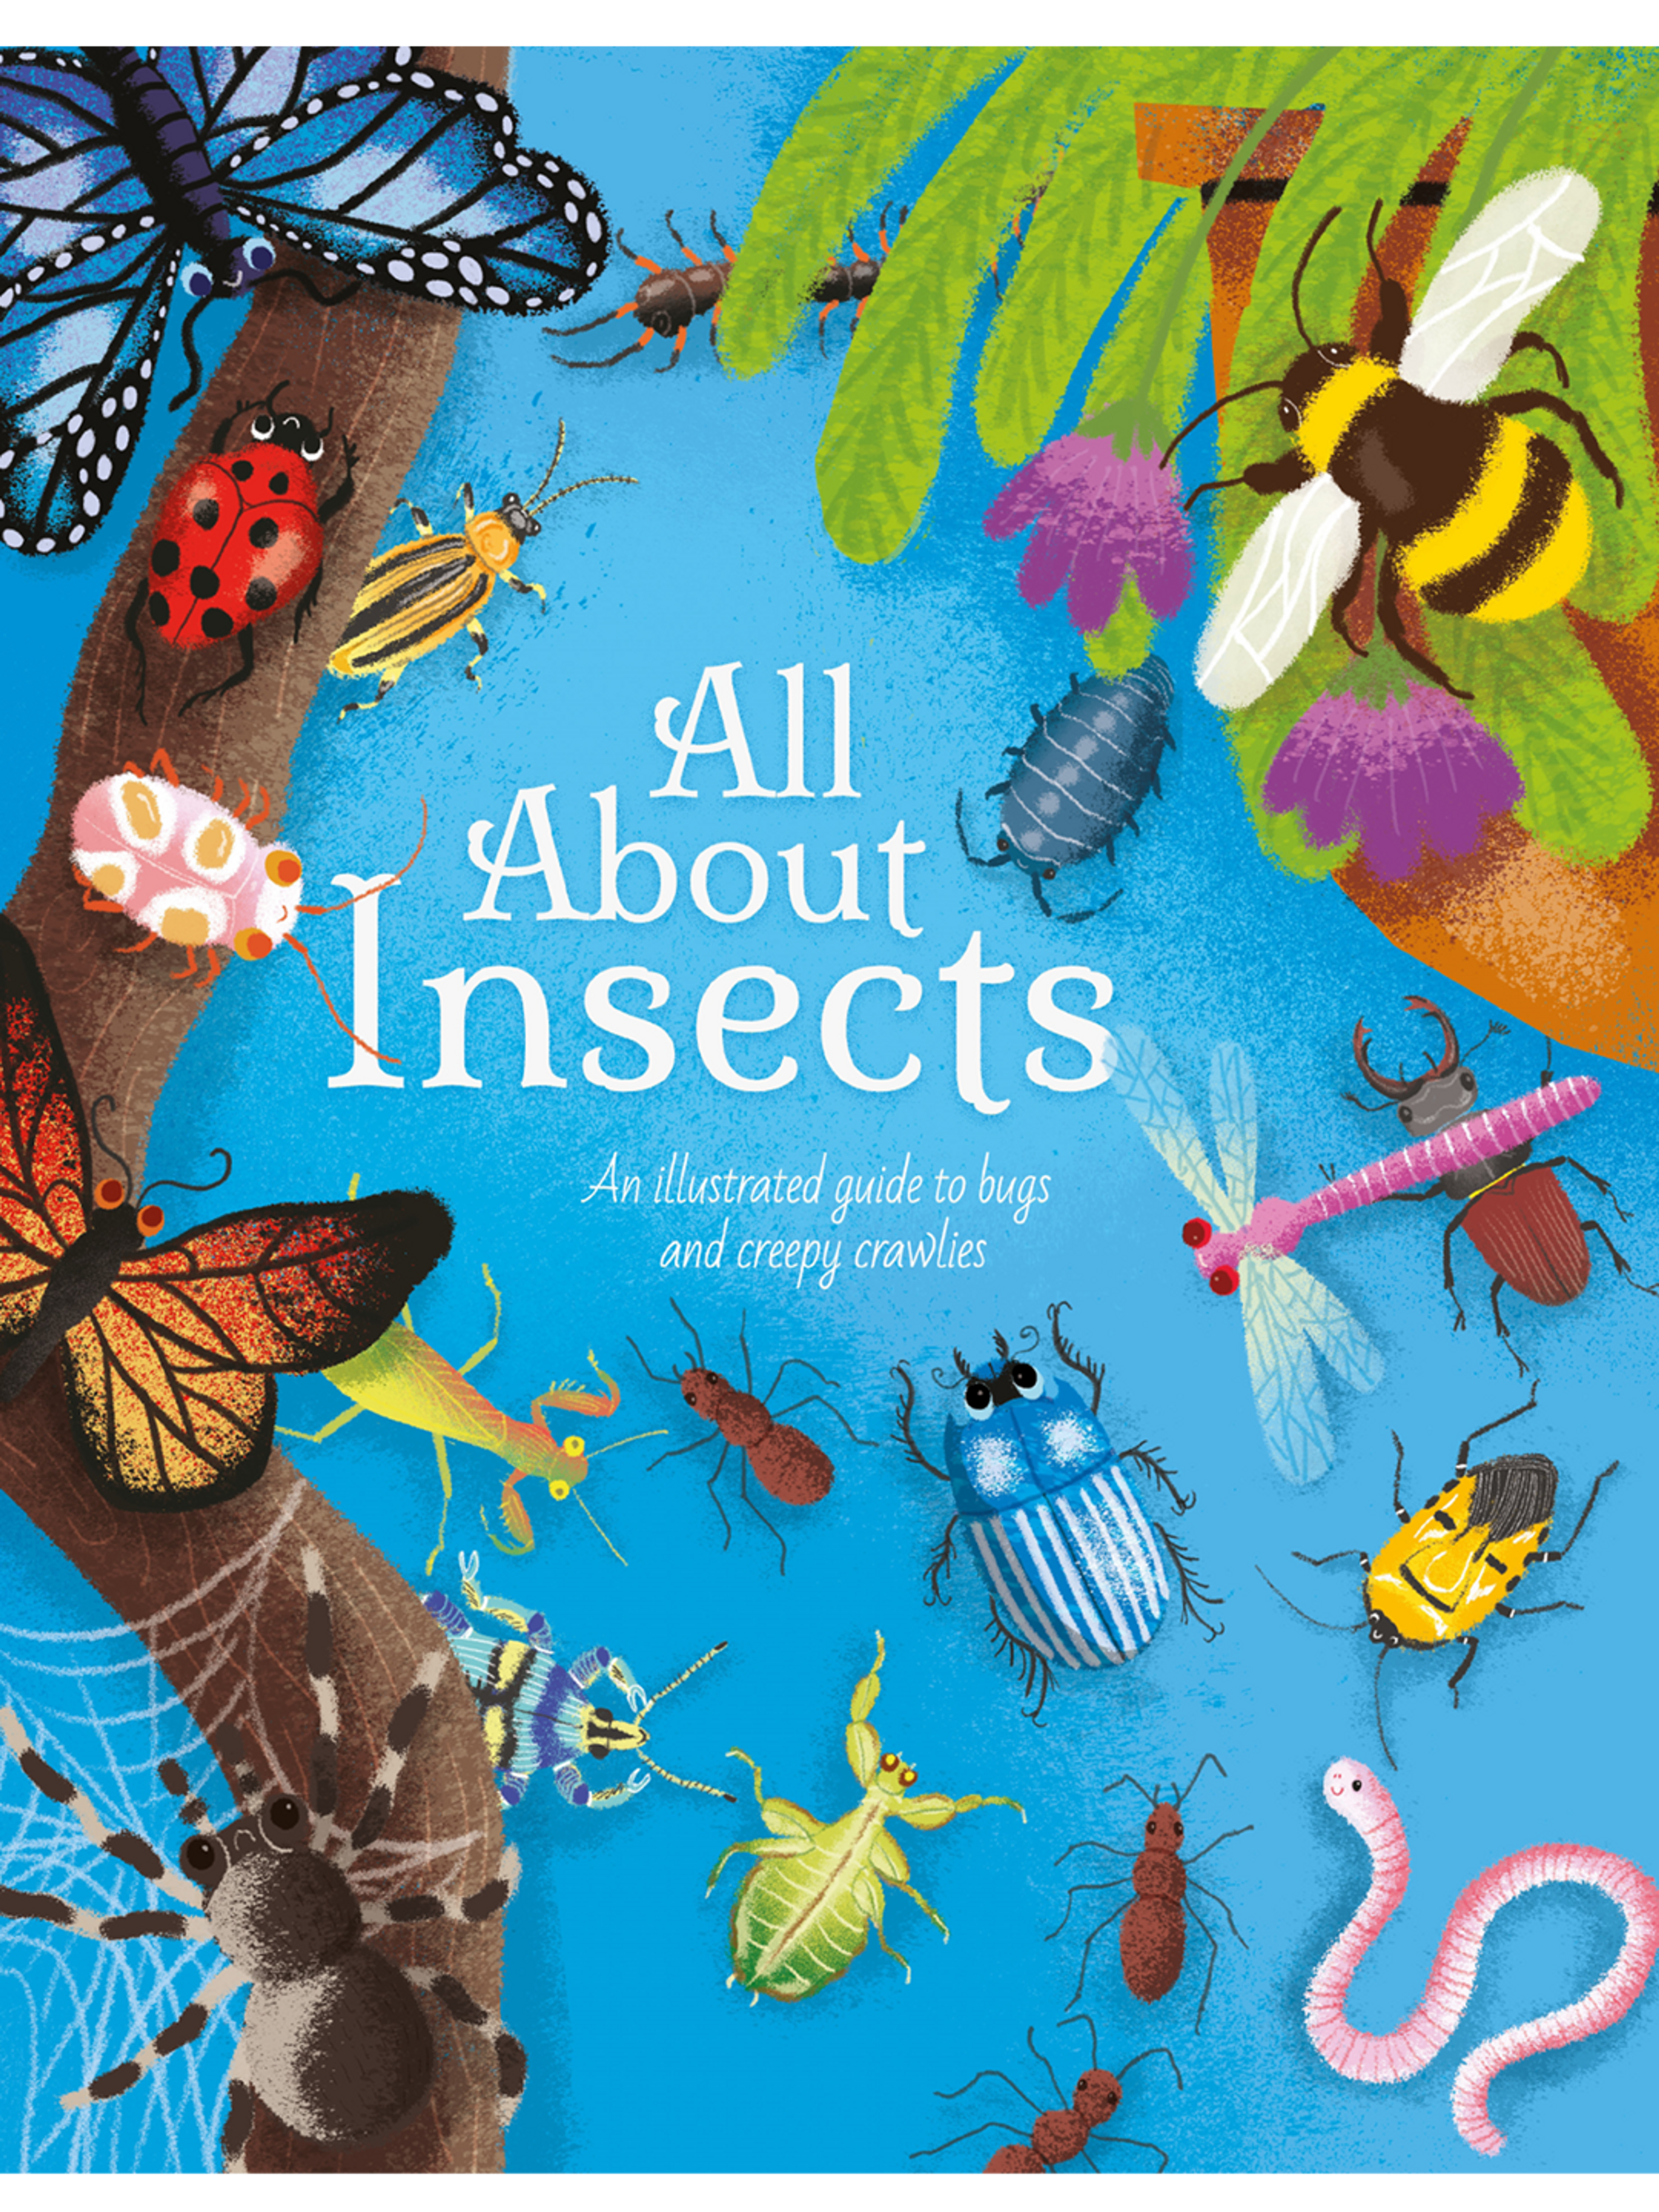 All about insects